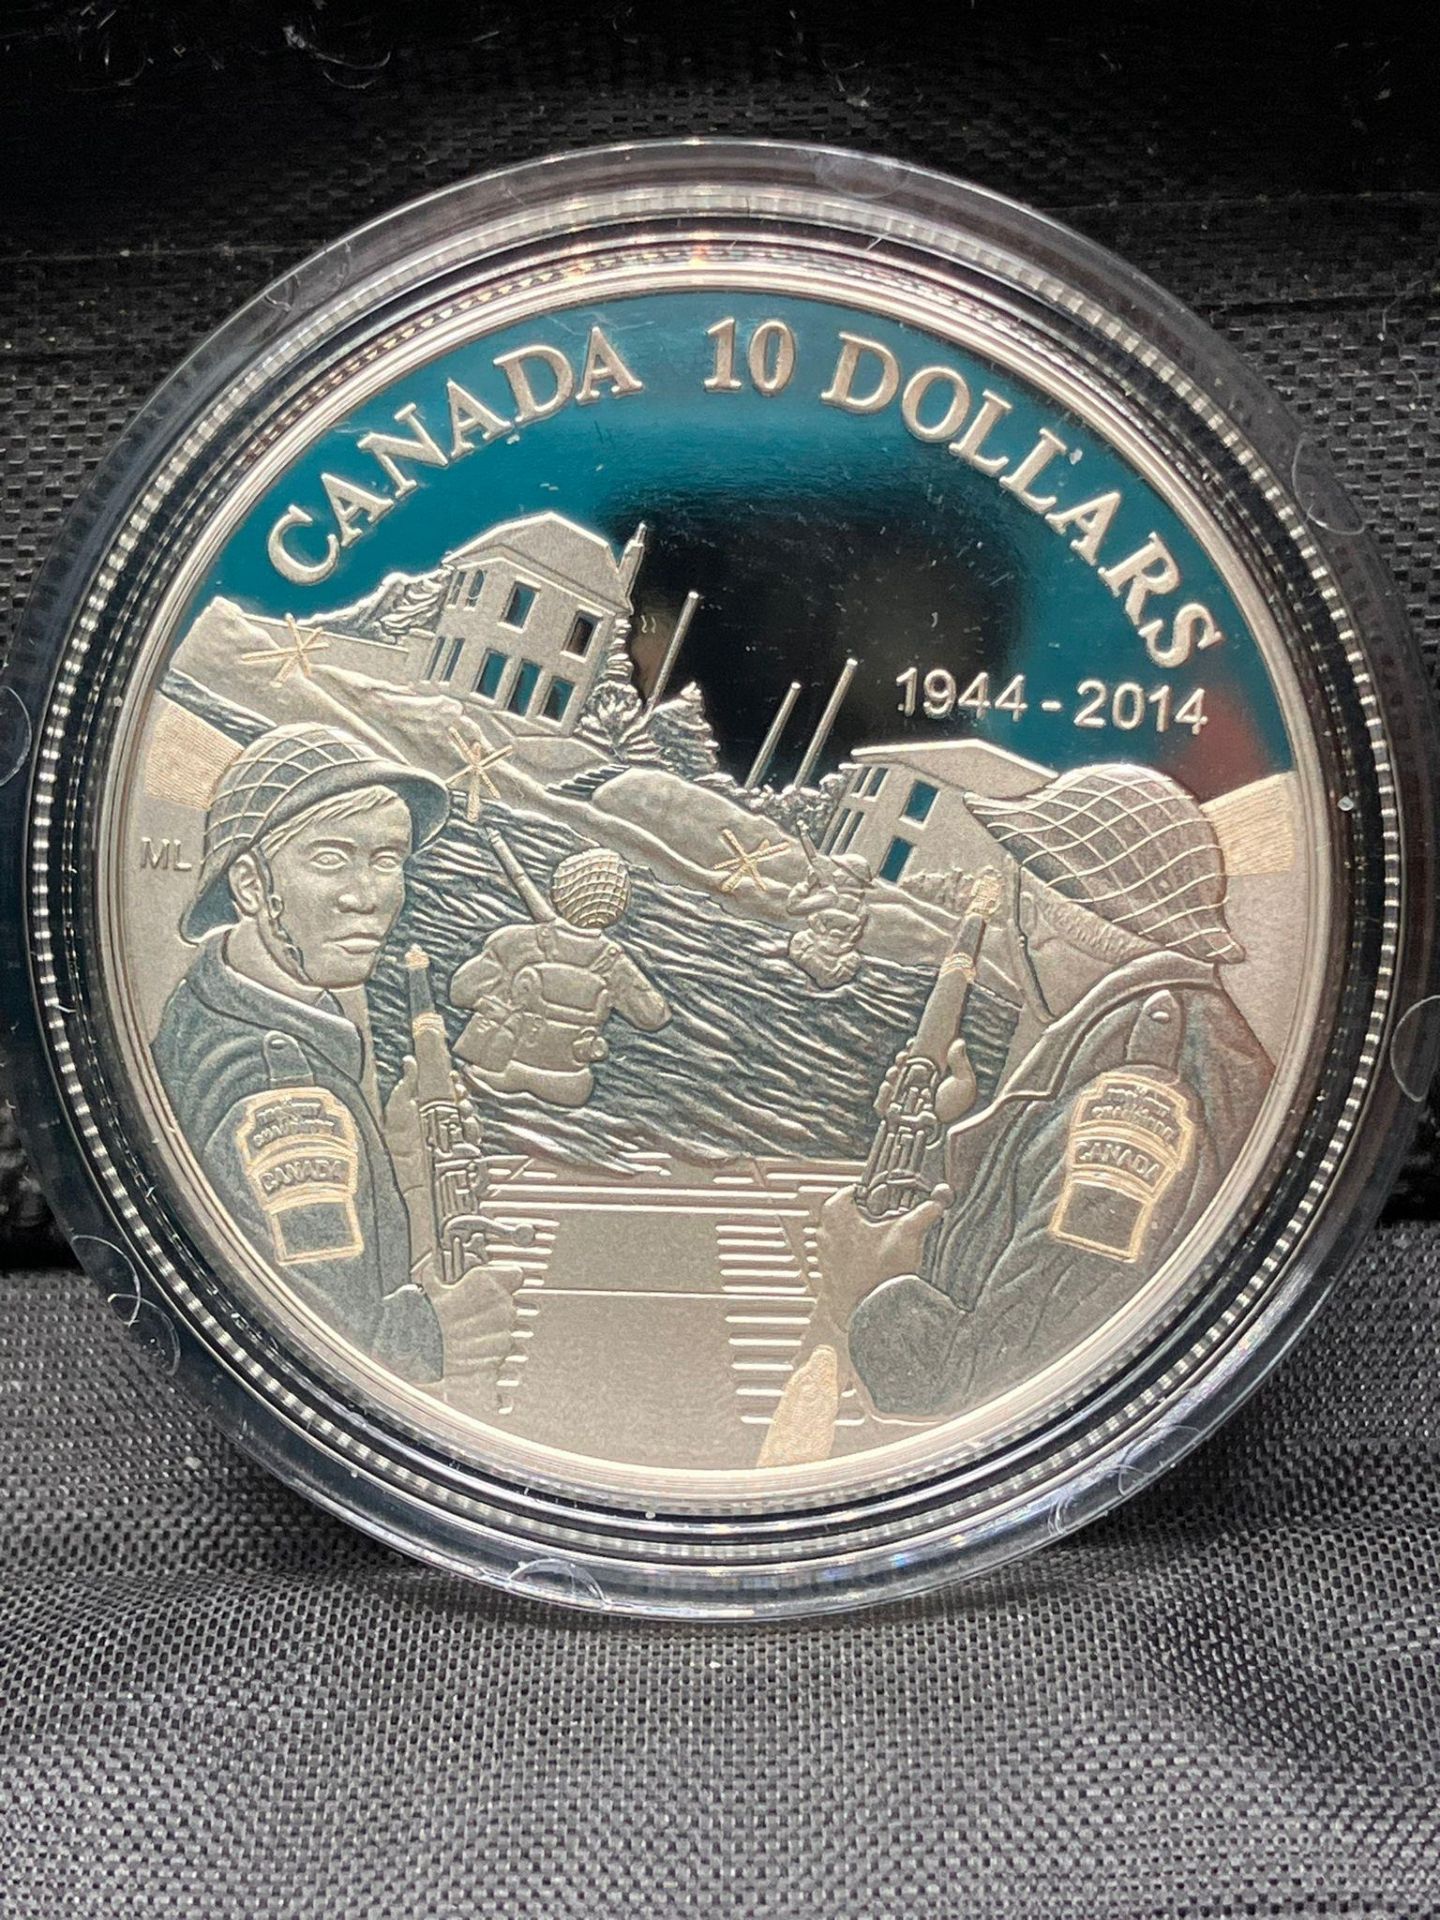 2014 CANADIAN D-DAY 10 DOLLAR COIN. Struck in PURE SILVER by the Royal Canadian Mint to - Image 6 of 7